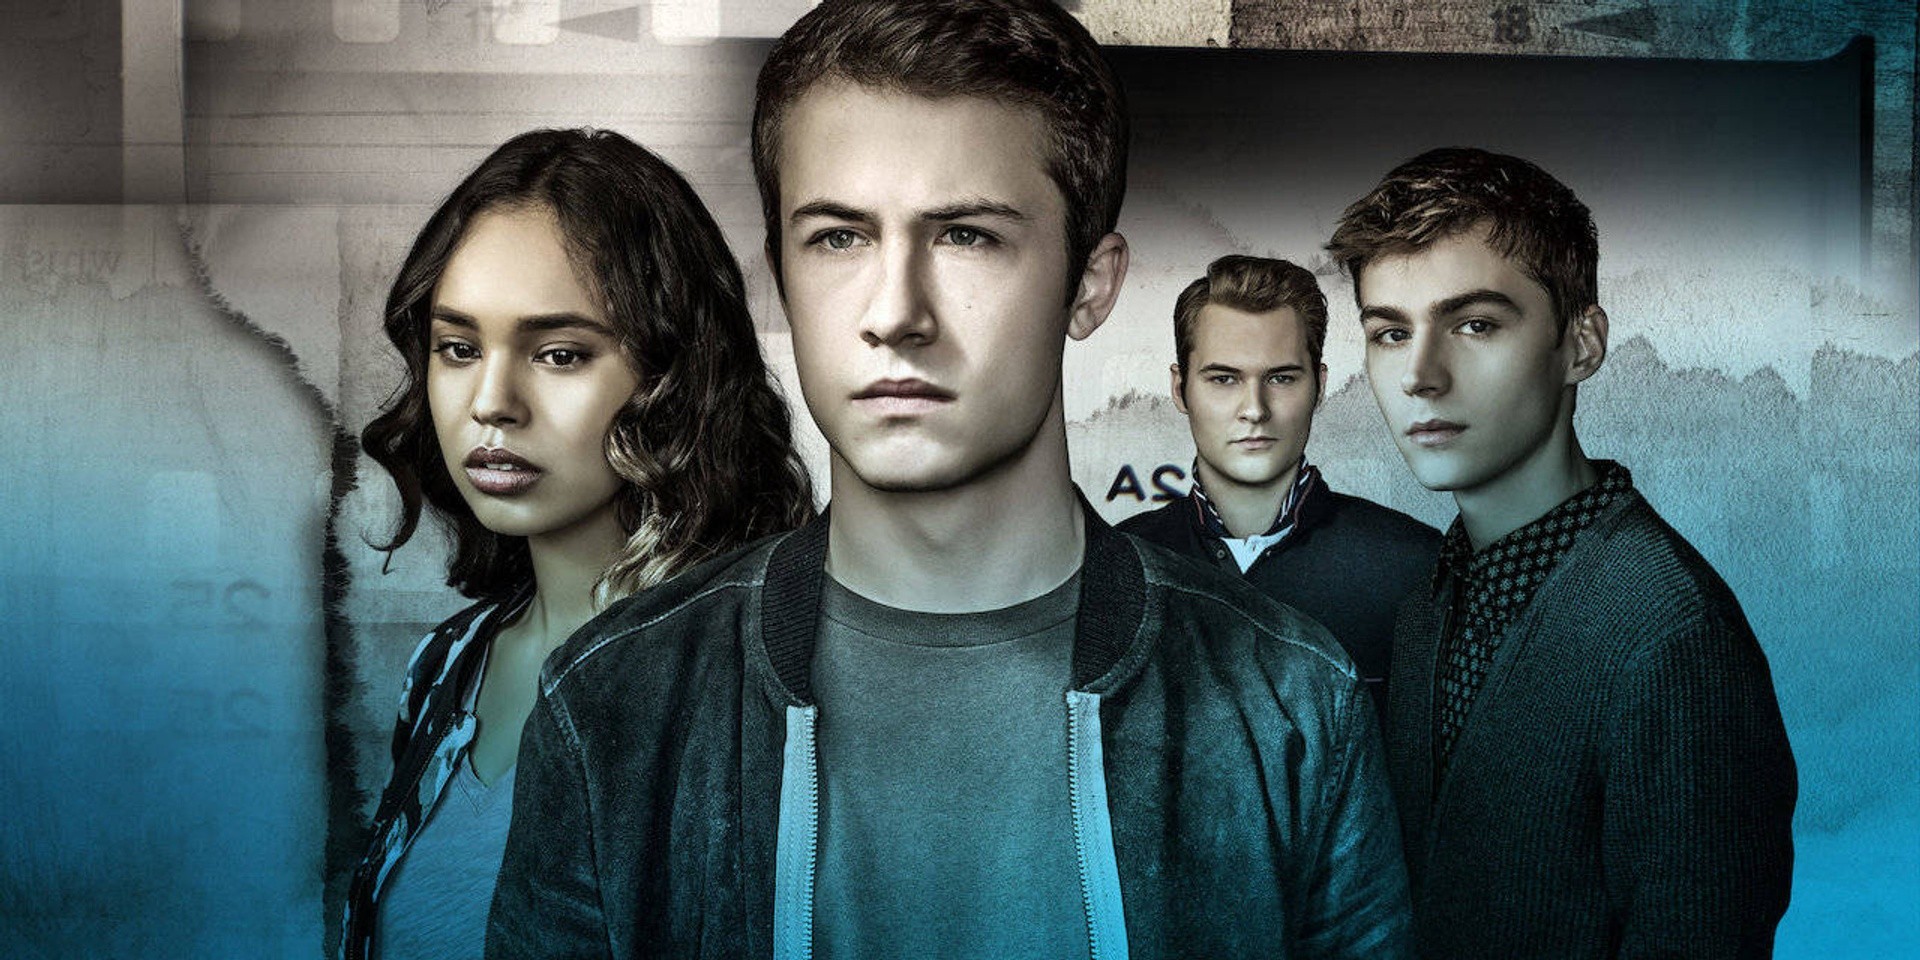 Tracklist for 13 Reasons Why Season 3 soundtrack announced – Charli XCX, YUNGBLUD, 5 Seconds of Summer, and more confirmed